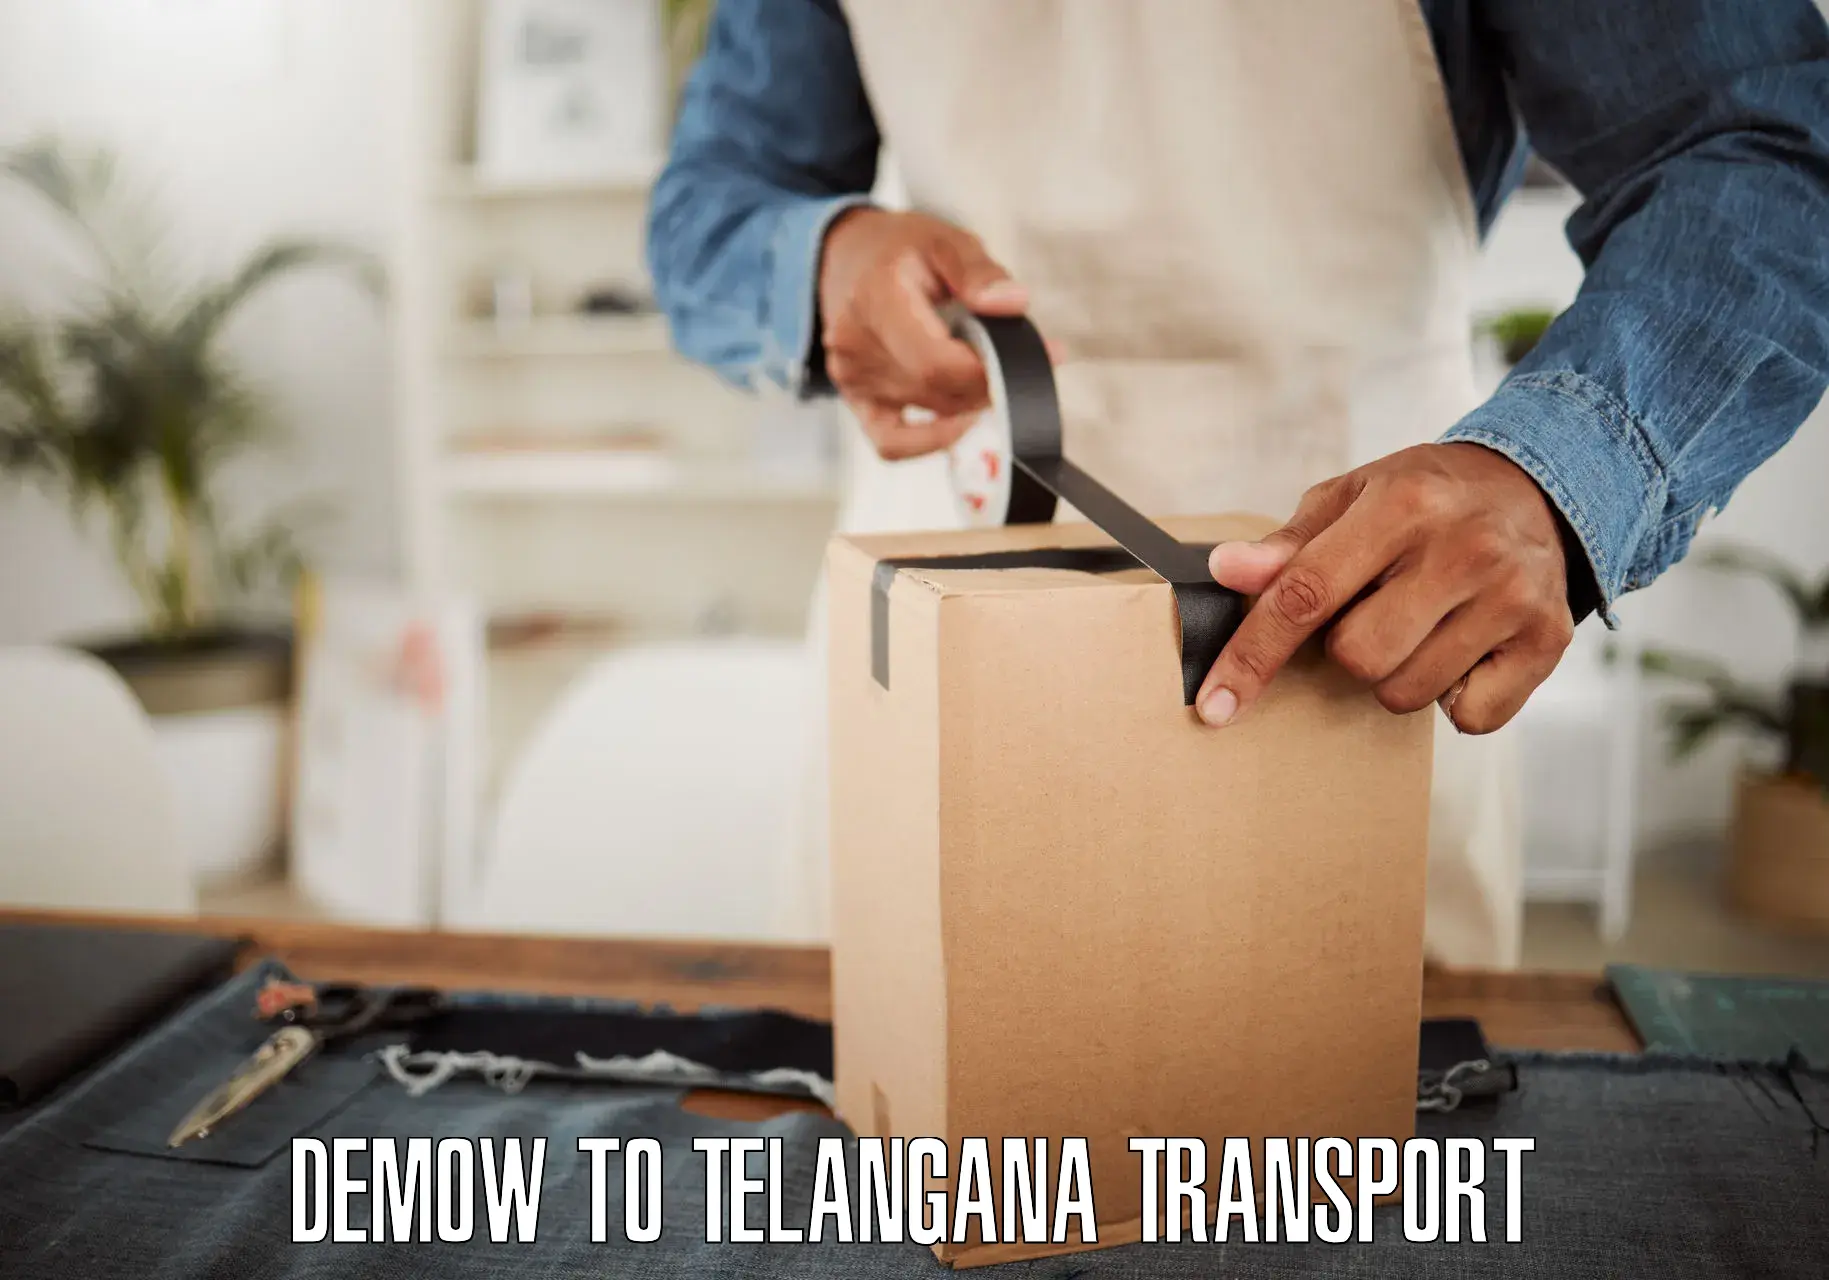 Domestic goods transportation services Demow to Telangana